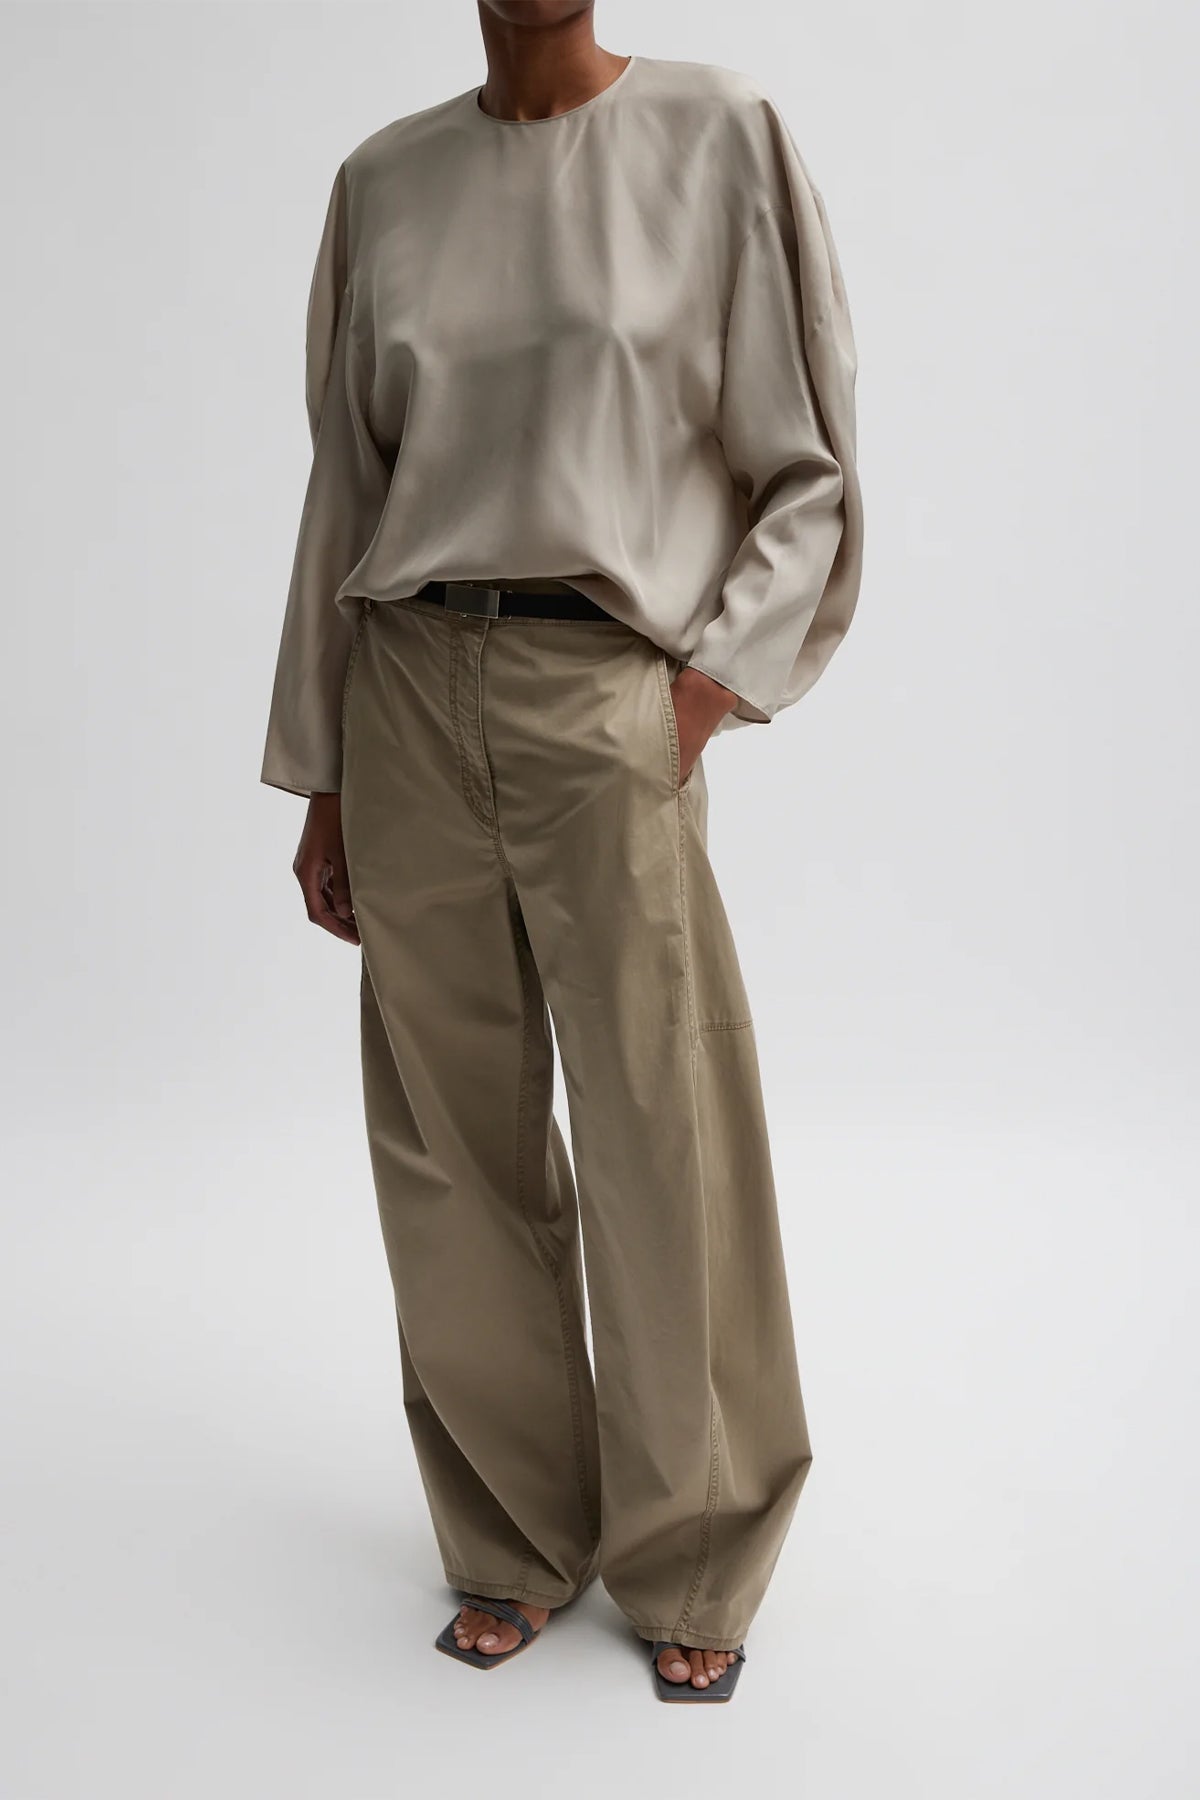 Garment Dyed Silky Cotton Sid Chino Pant (Short) in Acorn - shop-olivia.com